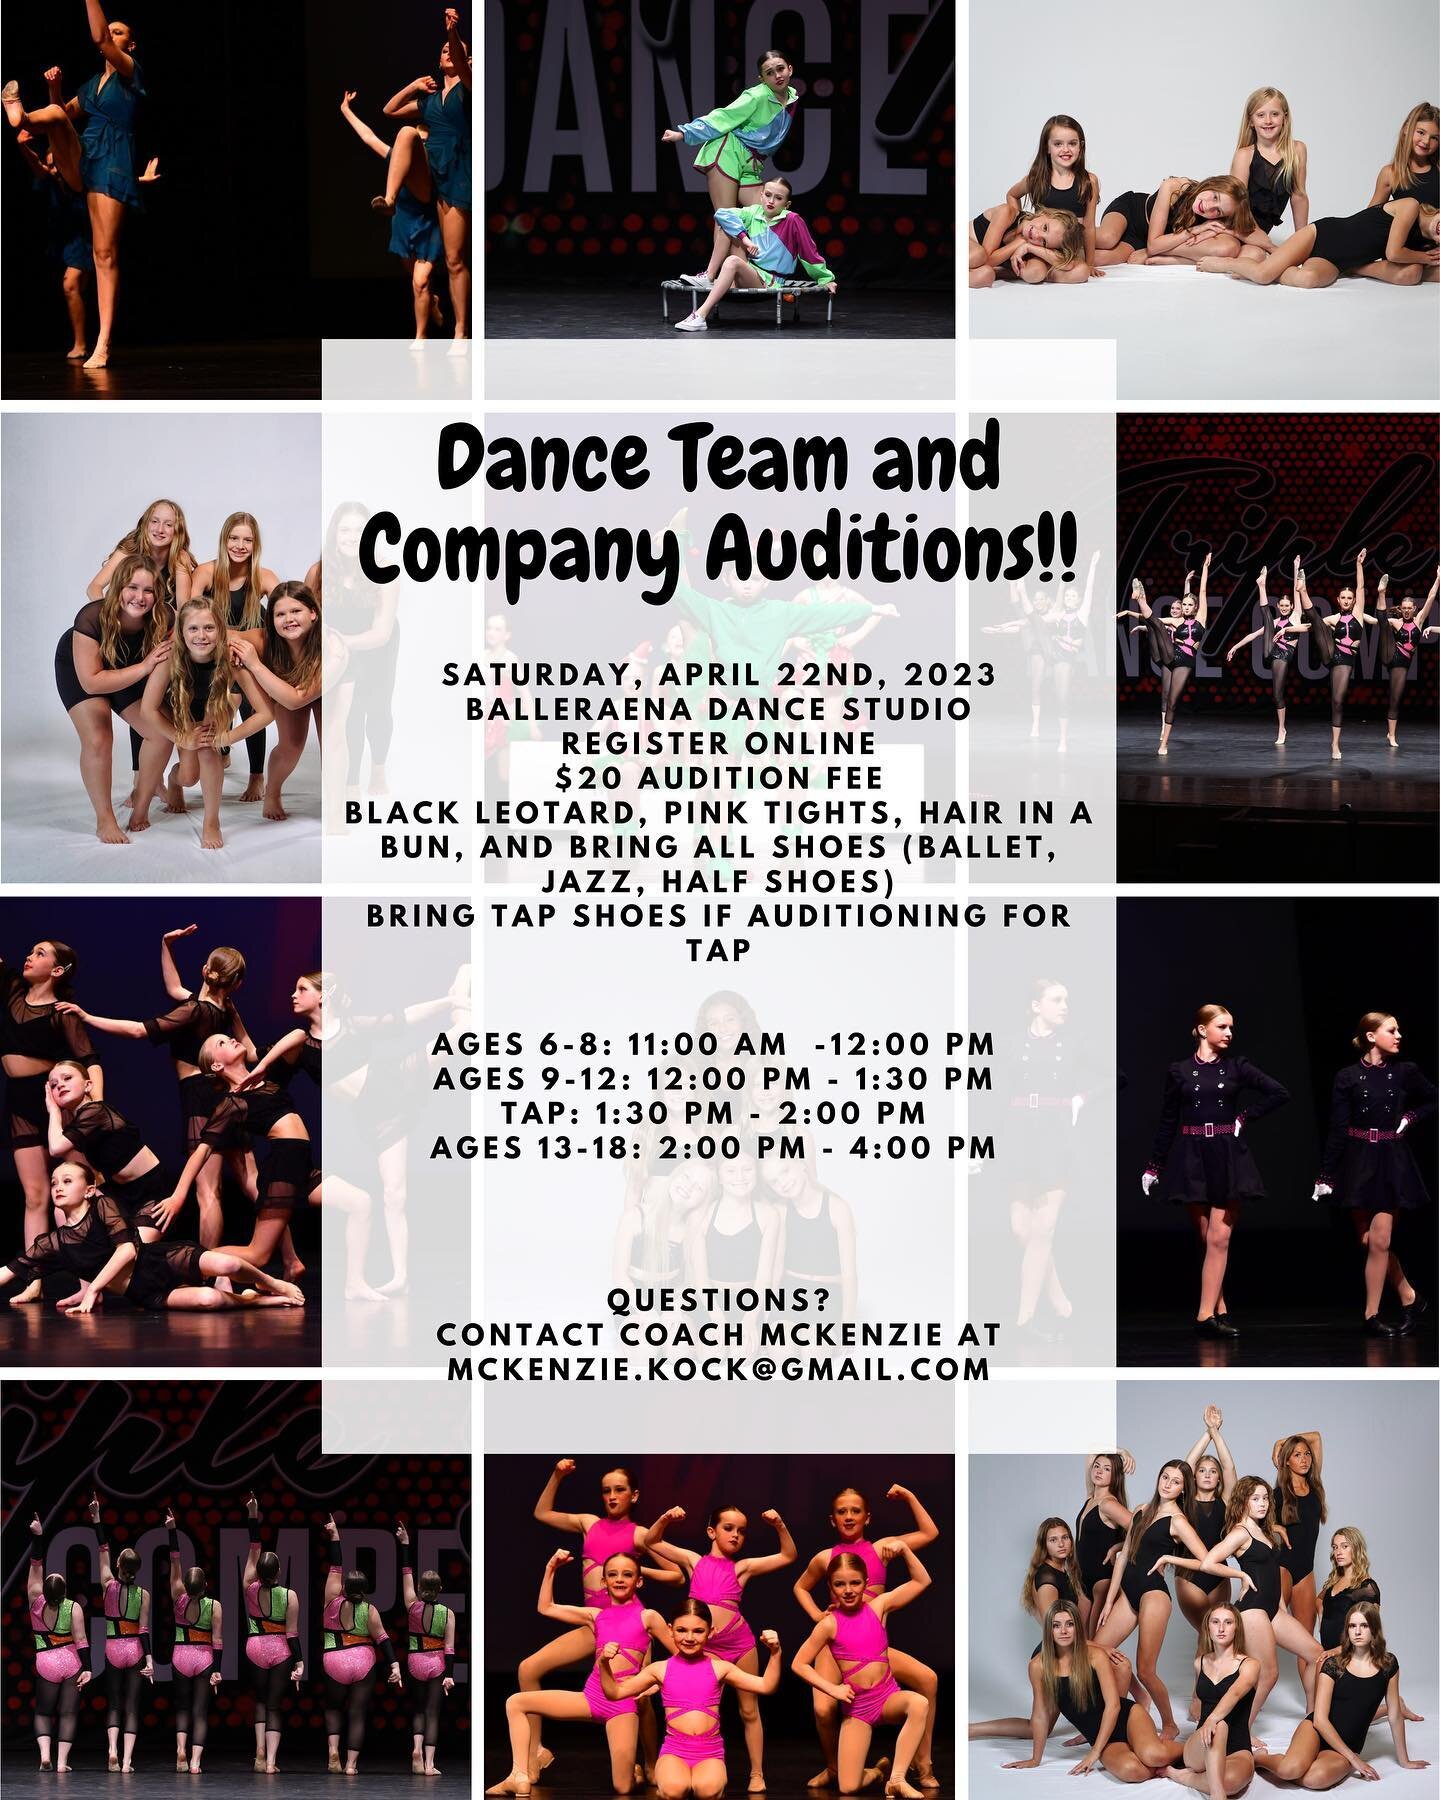 TOMORROW IS THE DAY!
Interested in taking your dance training to the next level while building skills in teamwork, accountability, work ethic, and discipline? Team might be the right choice for you!
TEAM (competitive group): ages 6-18 years old
COMPA